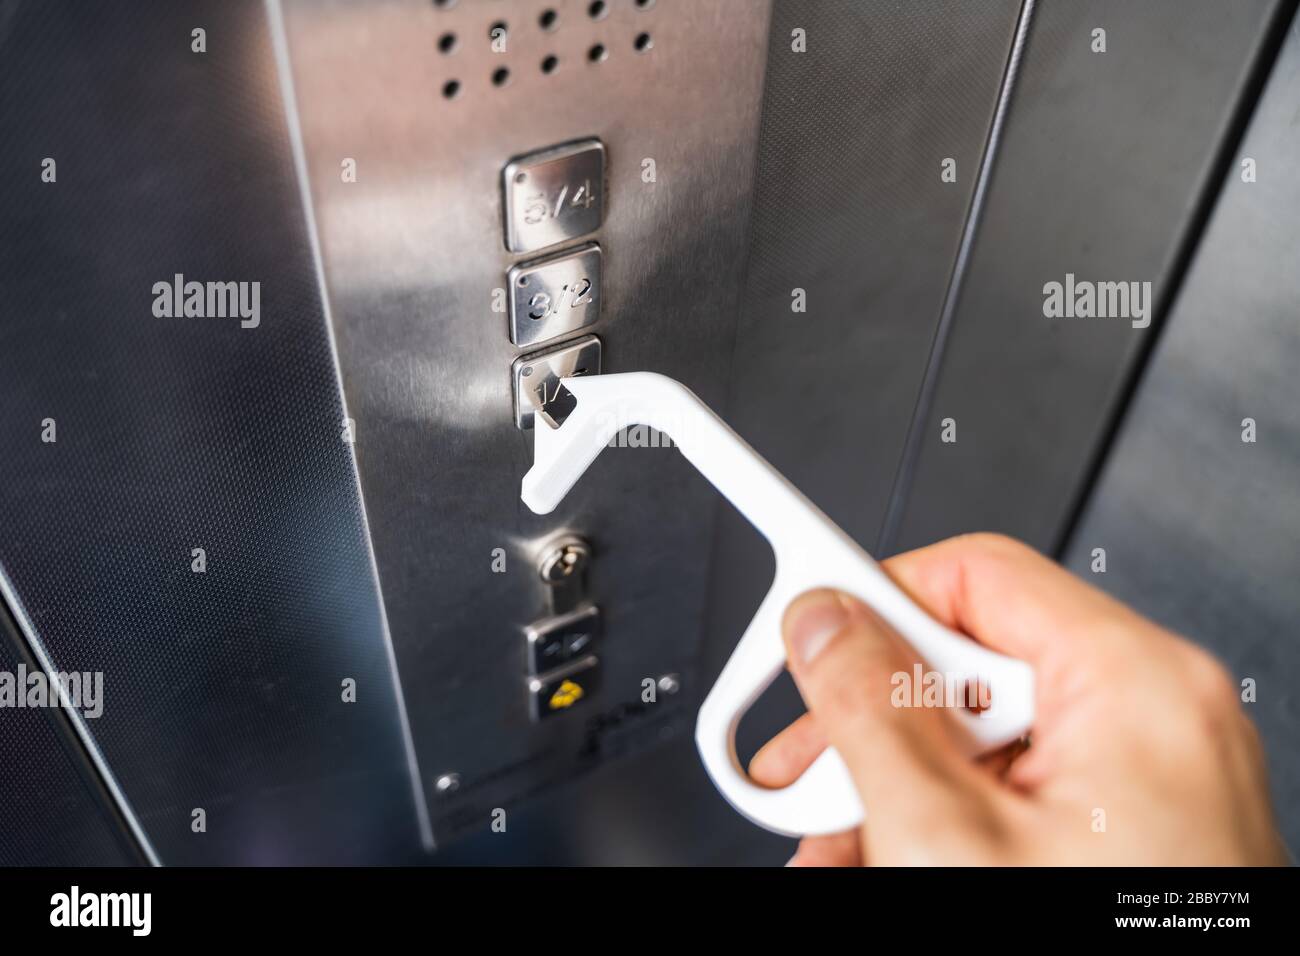 Man Using Contactless Tool To Press Button To Protect From Coronavirus Infection Stock Photo